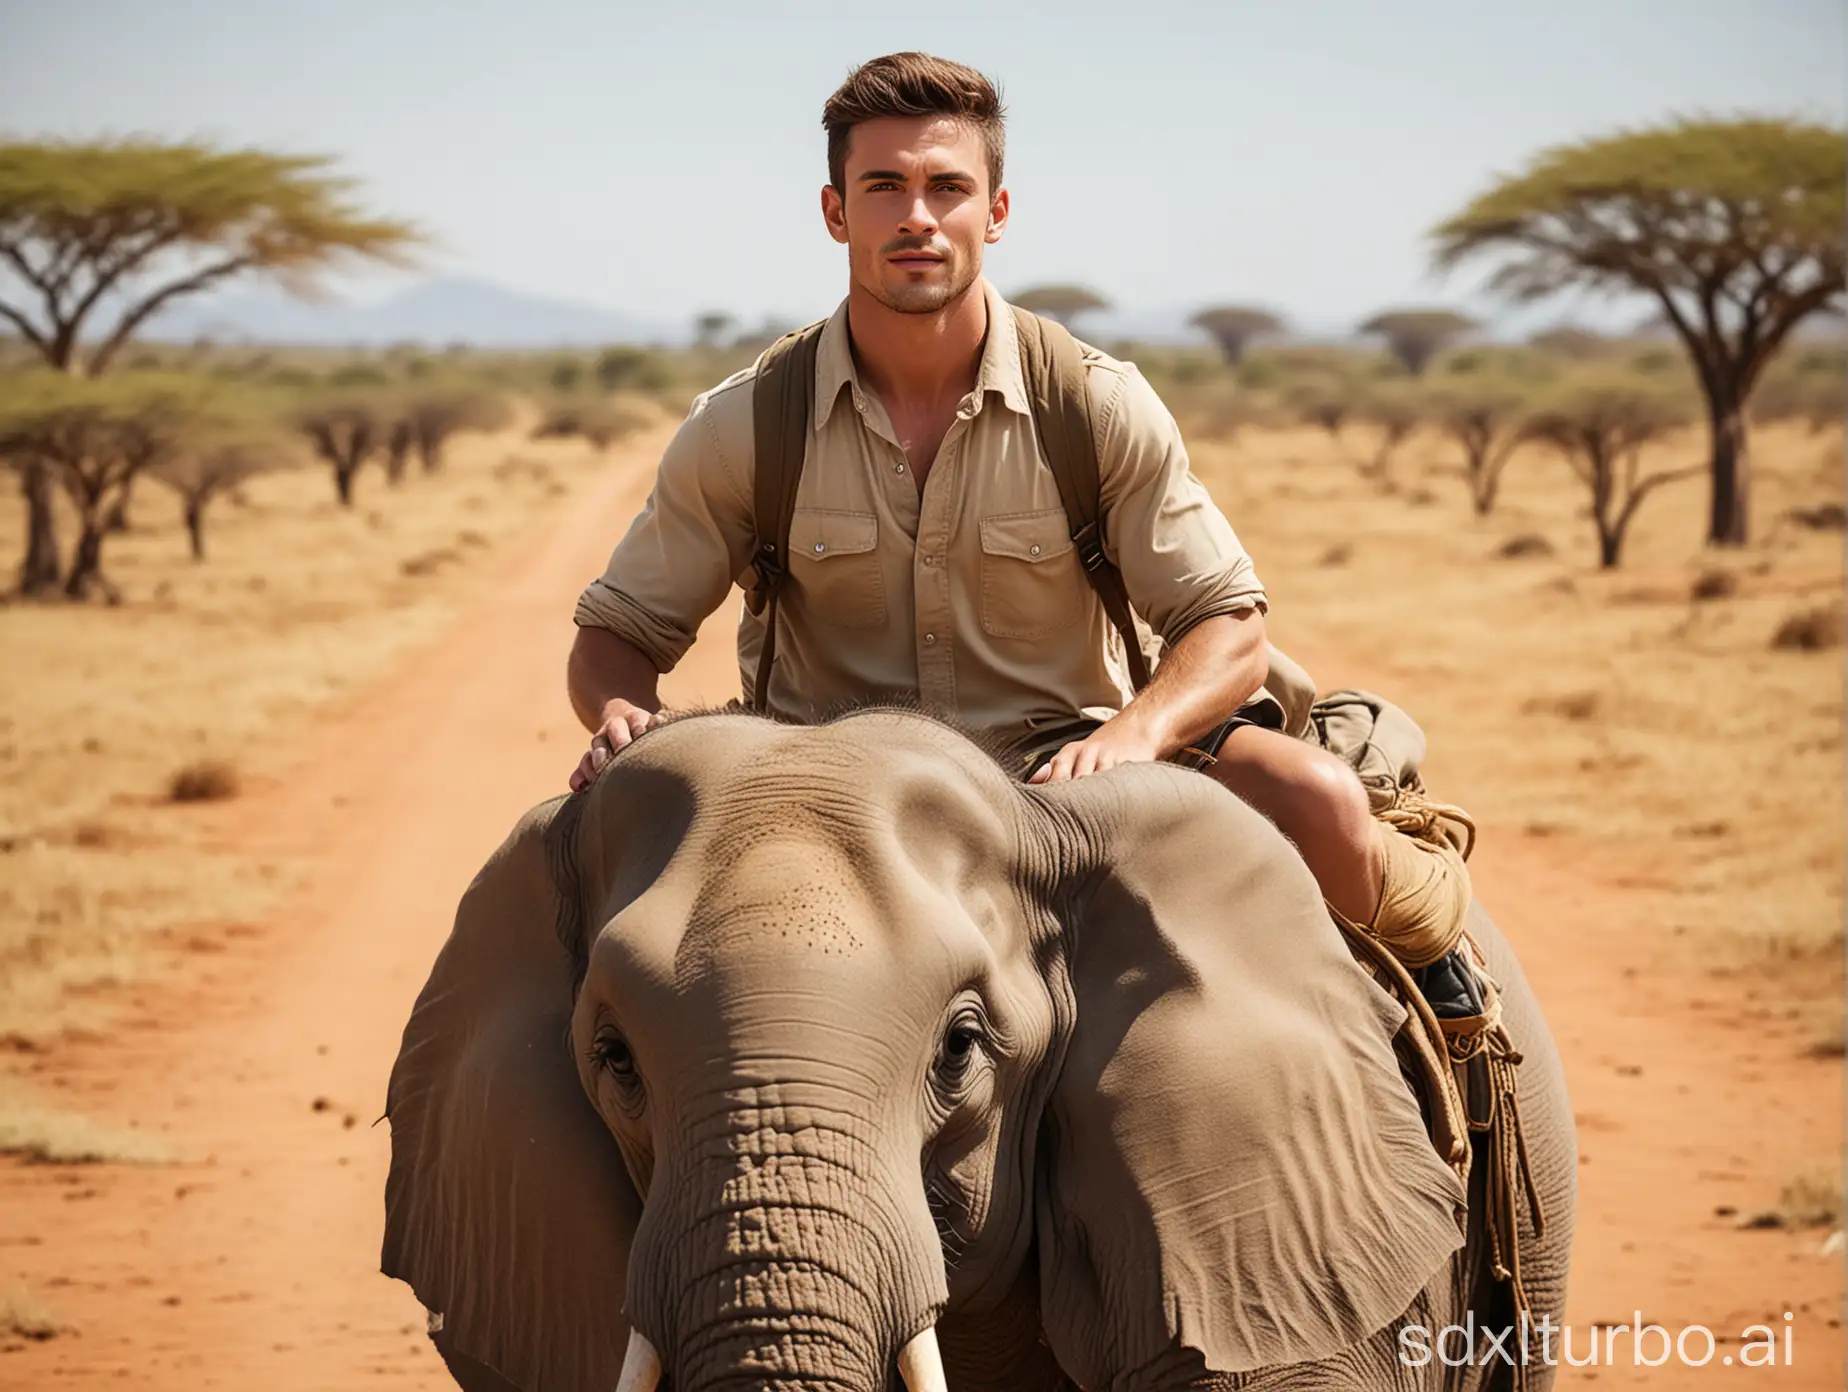 Handsome guy, middle distance, handsome guy riding an elephant, African savanna